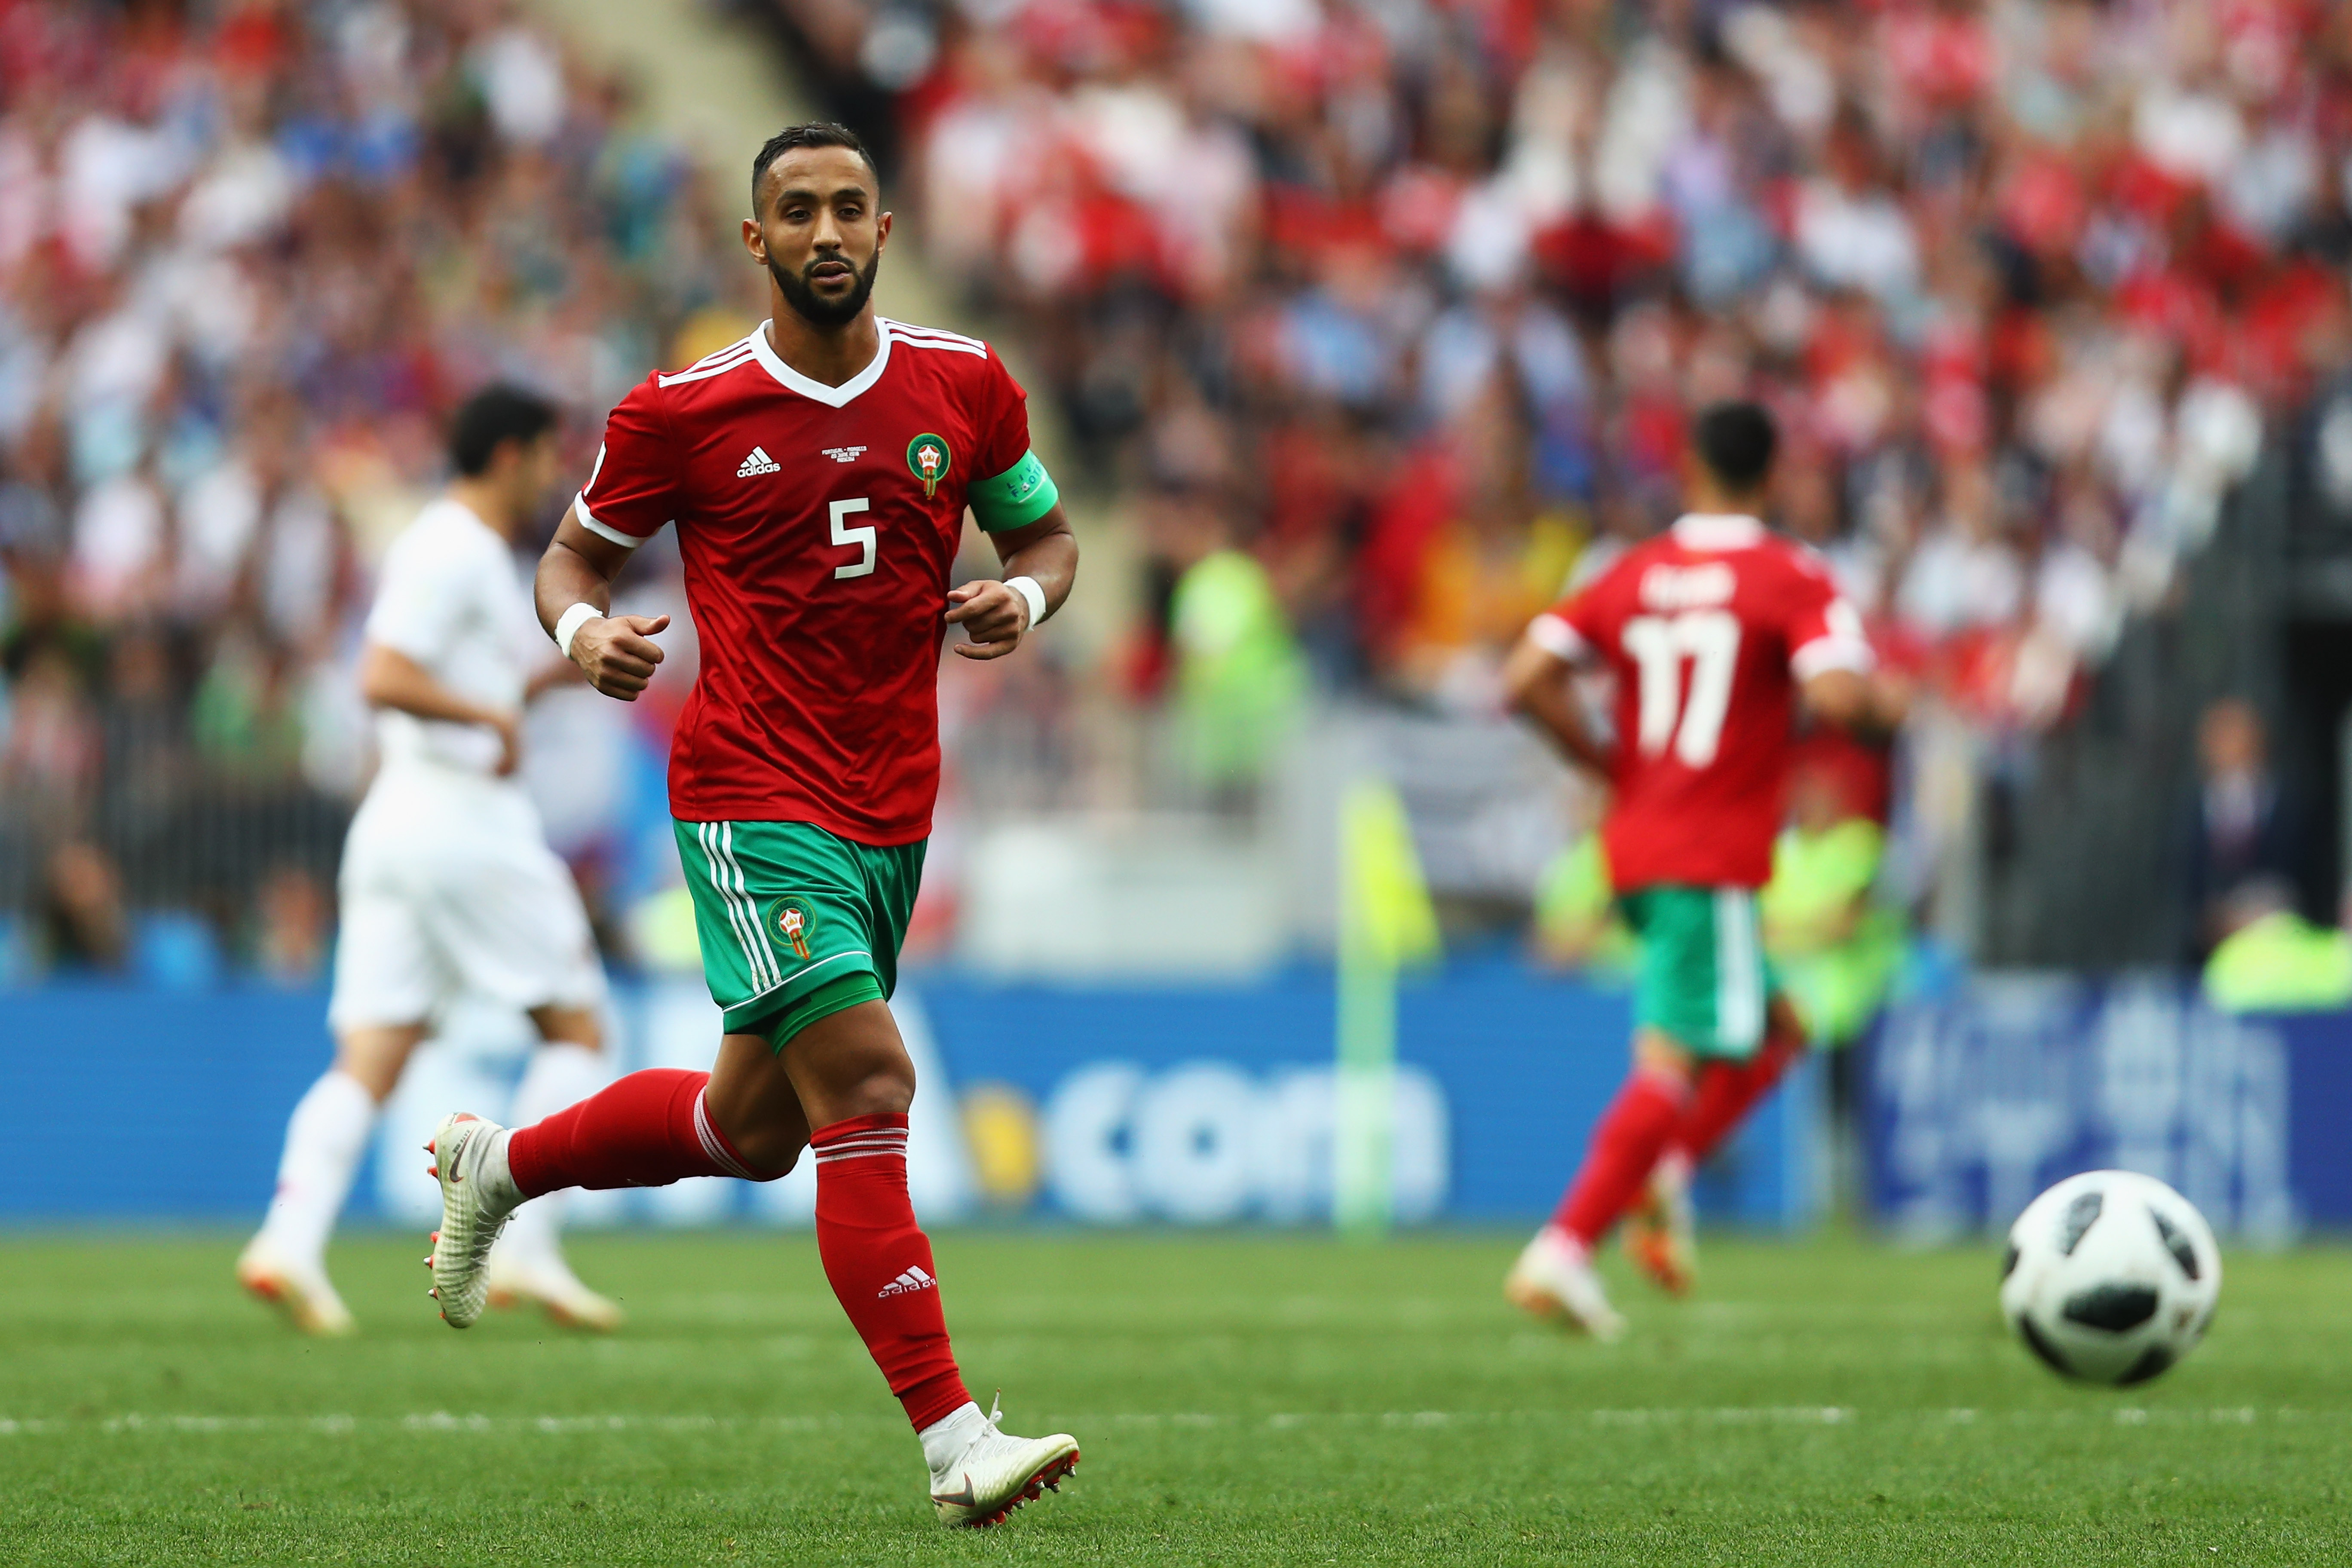 MOSCOW, RUSSIA - JUNE 20:  Medhi Benatia of Morocco in action during the 2018 FIFA World Cup Russia group B match between Portugal and Morocco at Luzhniki Stadium on June 20, 2018 in Moscow, Russia.  (Photo by Dean Mouhtaropoulos/Getty Images)